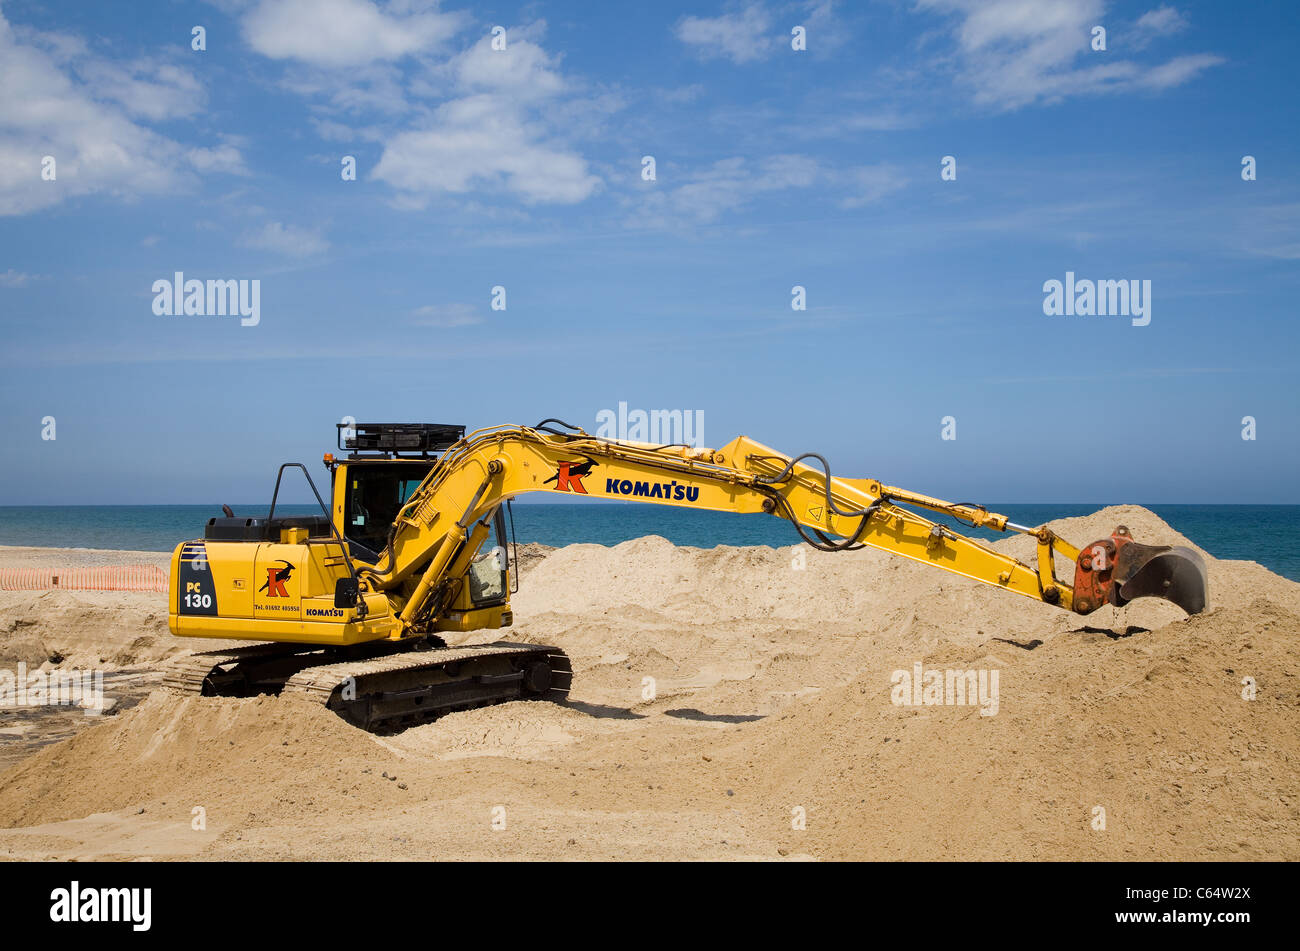 Komatsu PC130 seen here on a beach digging a trench for an archaeological dig Blue sea & sky with fluff white clouds Stock Photo